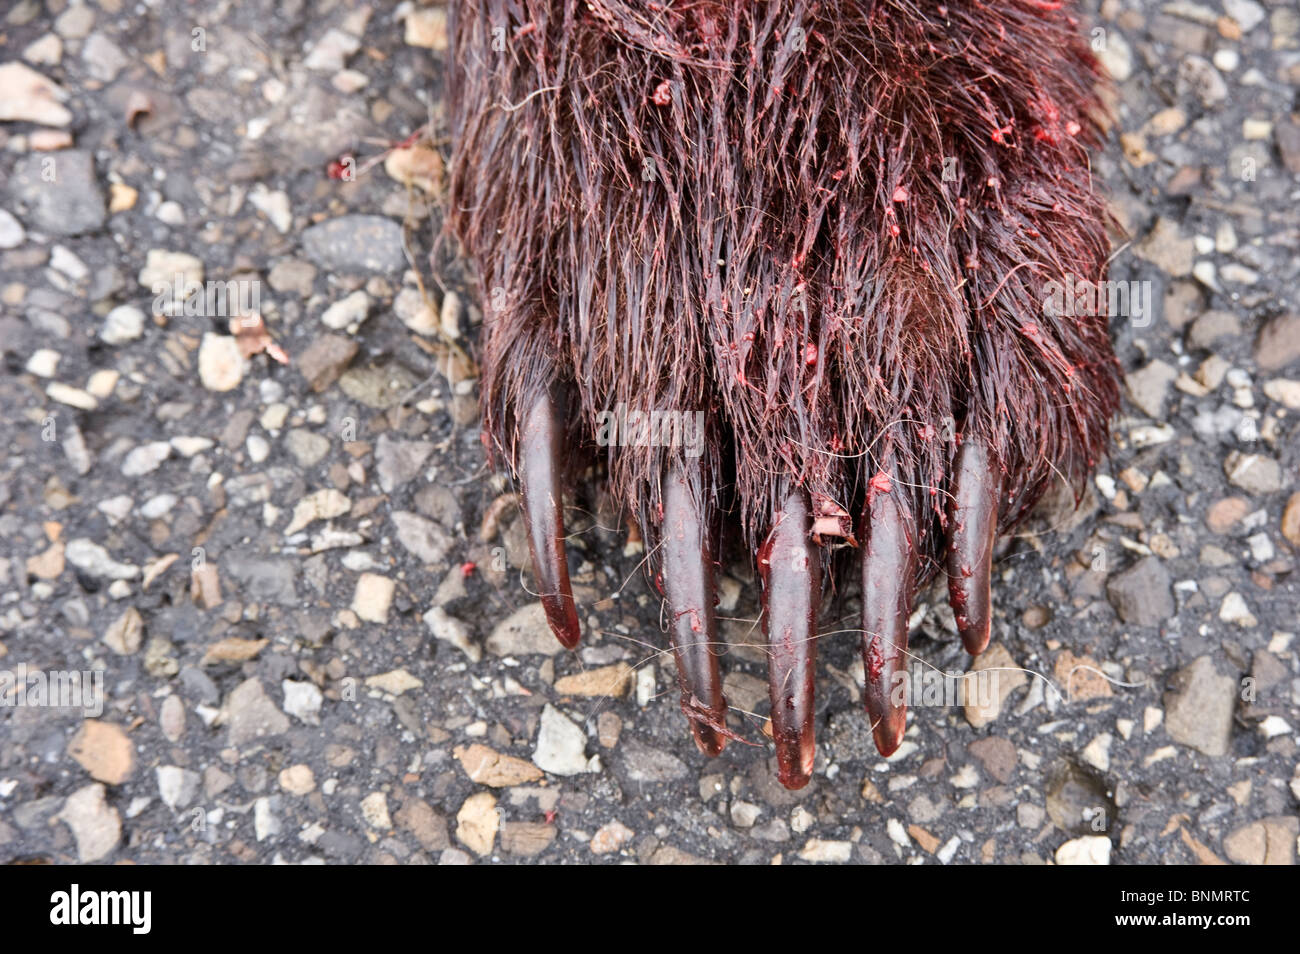 A Grizzly bear paw on a road killed bear Stock Photo